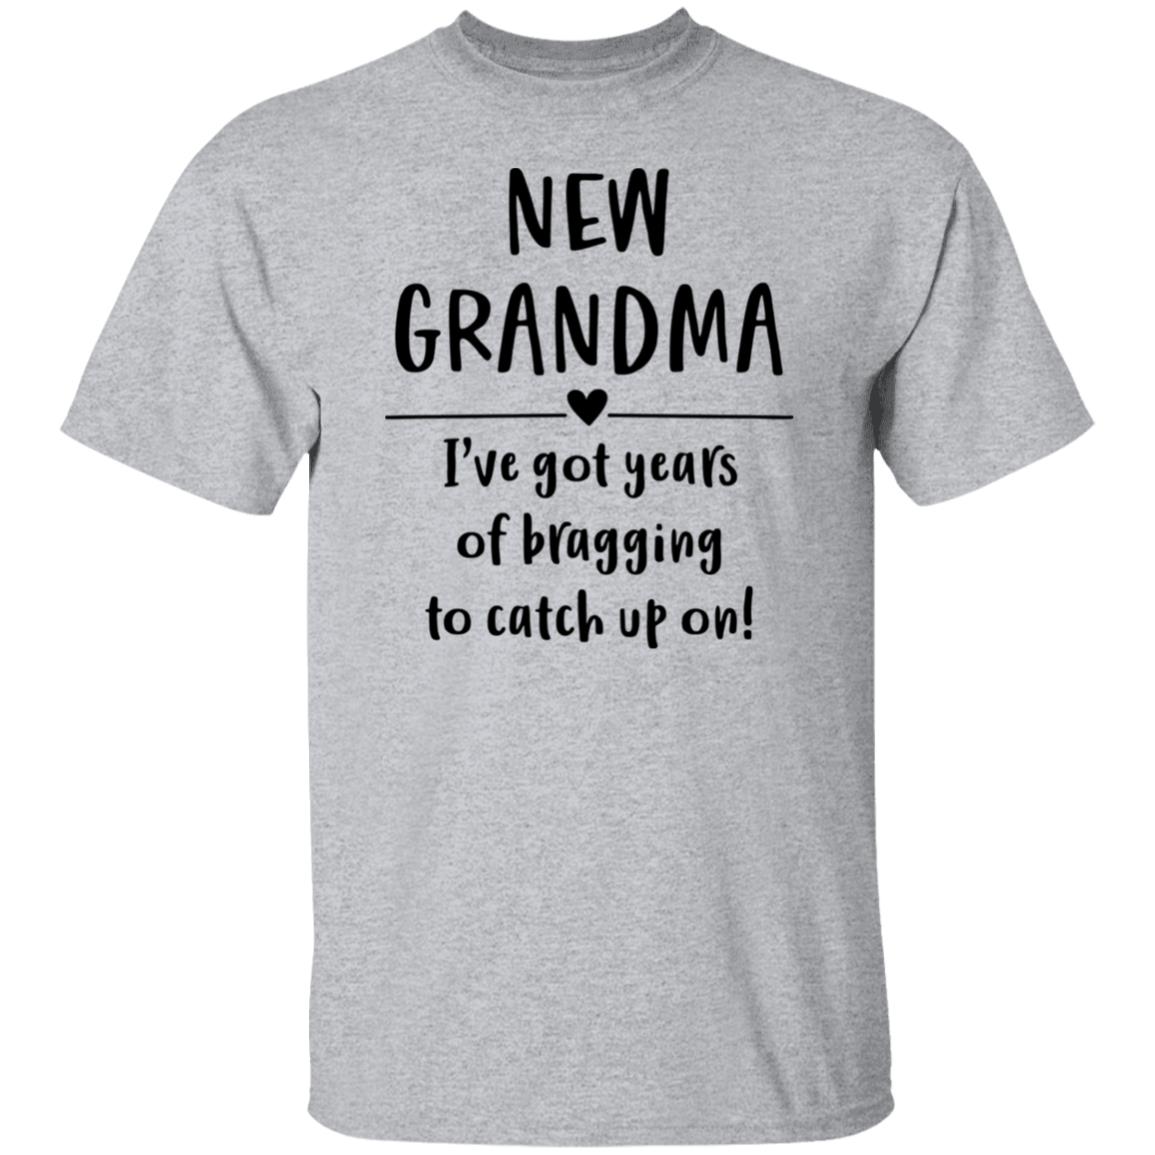 New Grandma T-Shirts with Short or Long Sleeve